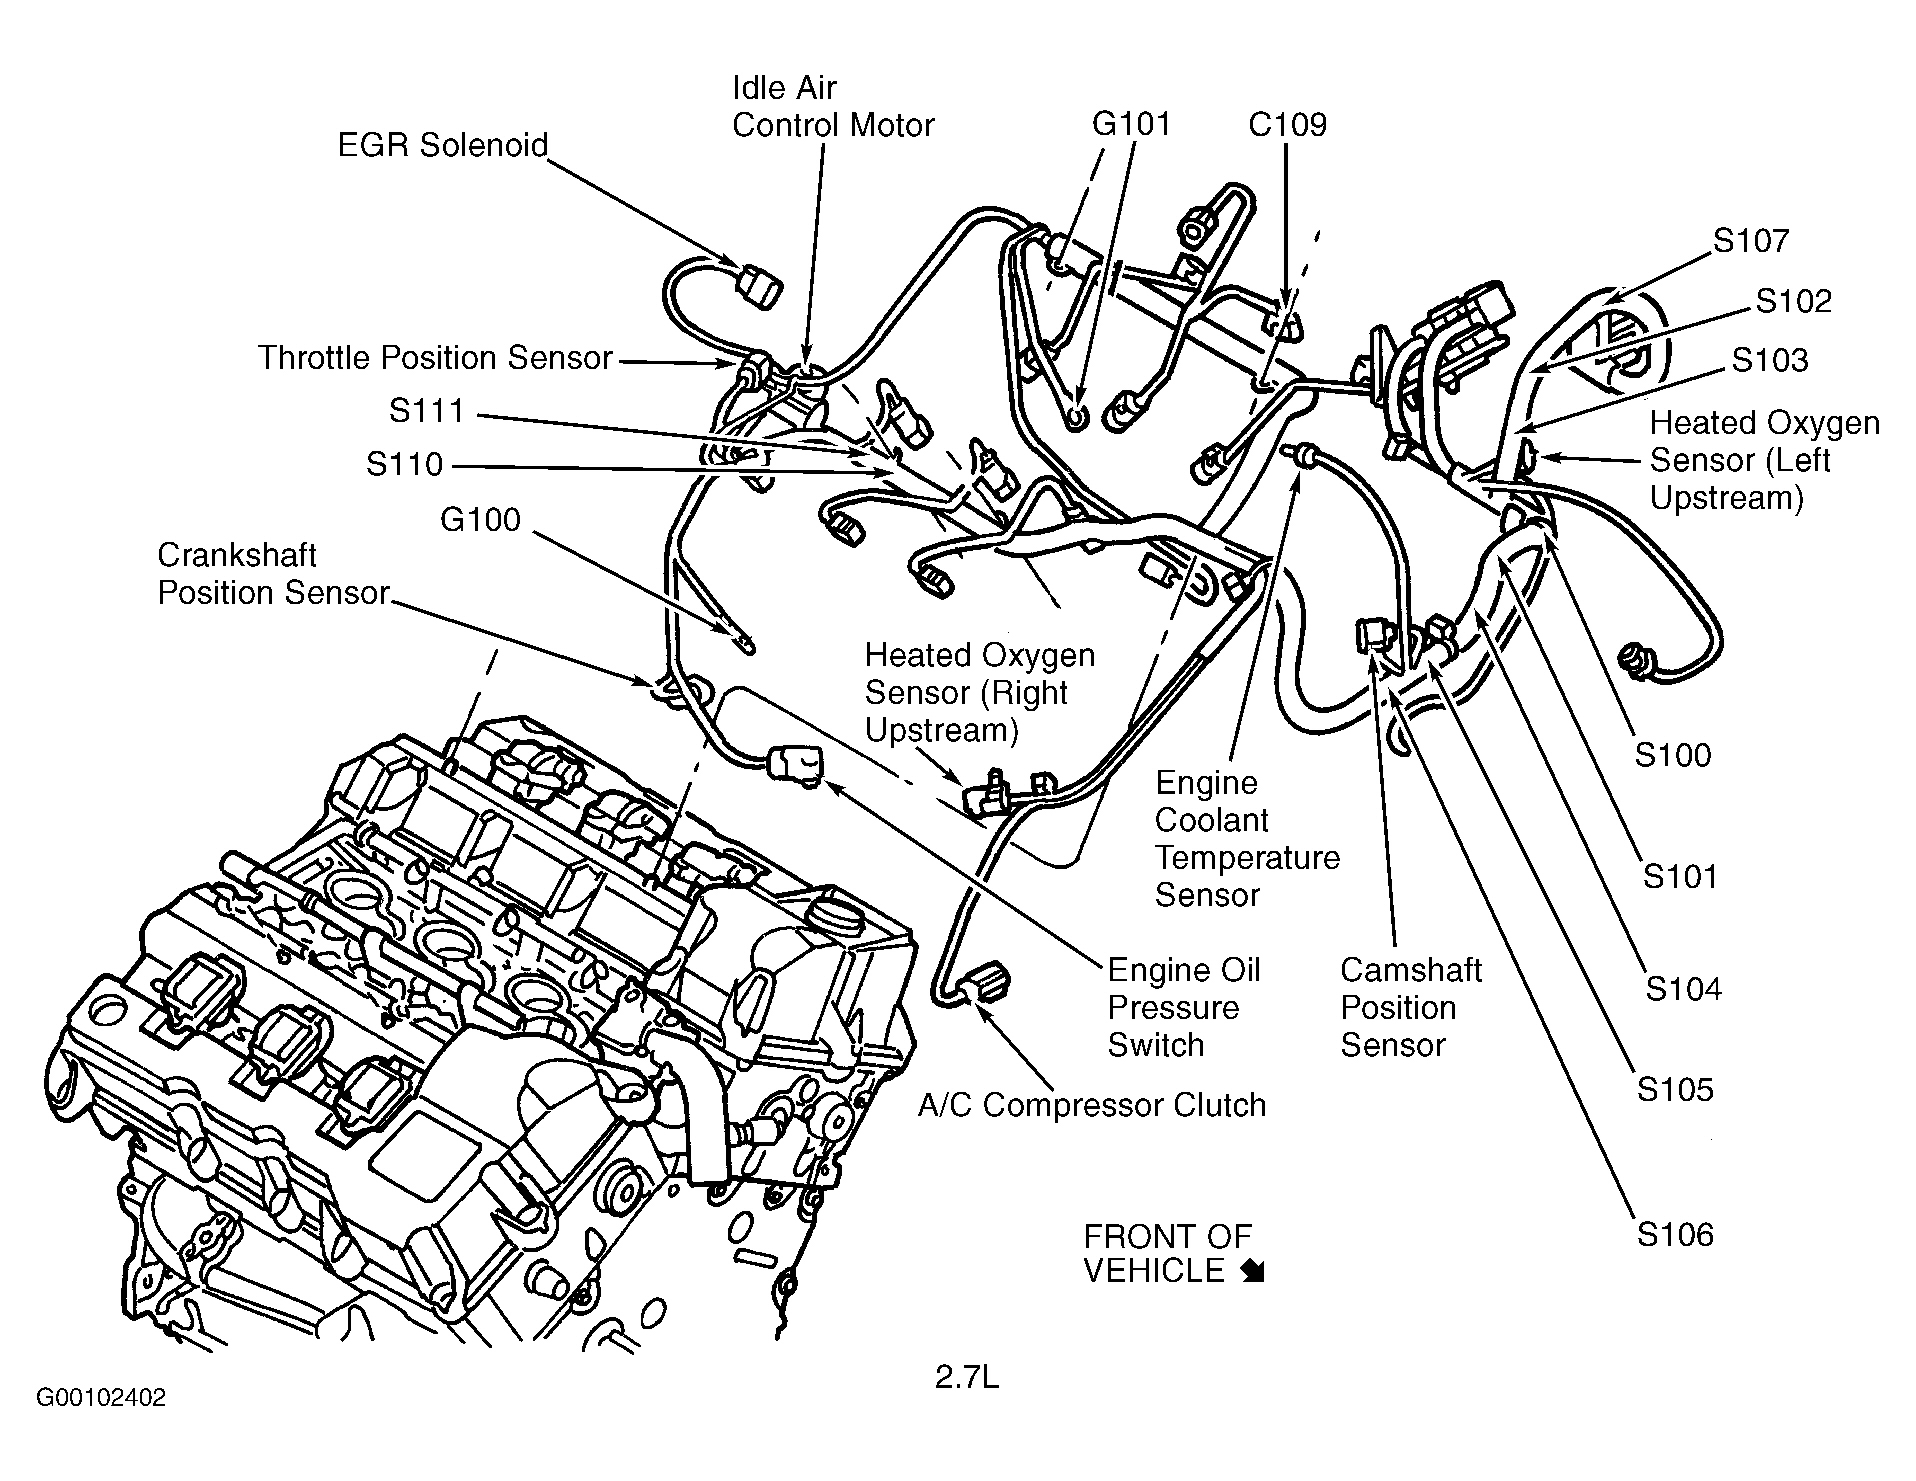 Dodge Intrepid 1998 - Component Locations -  Top Of Engine (2.7L)